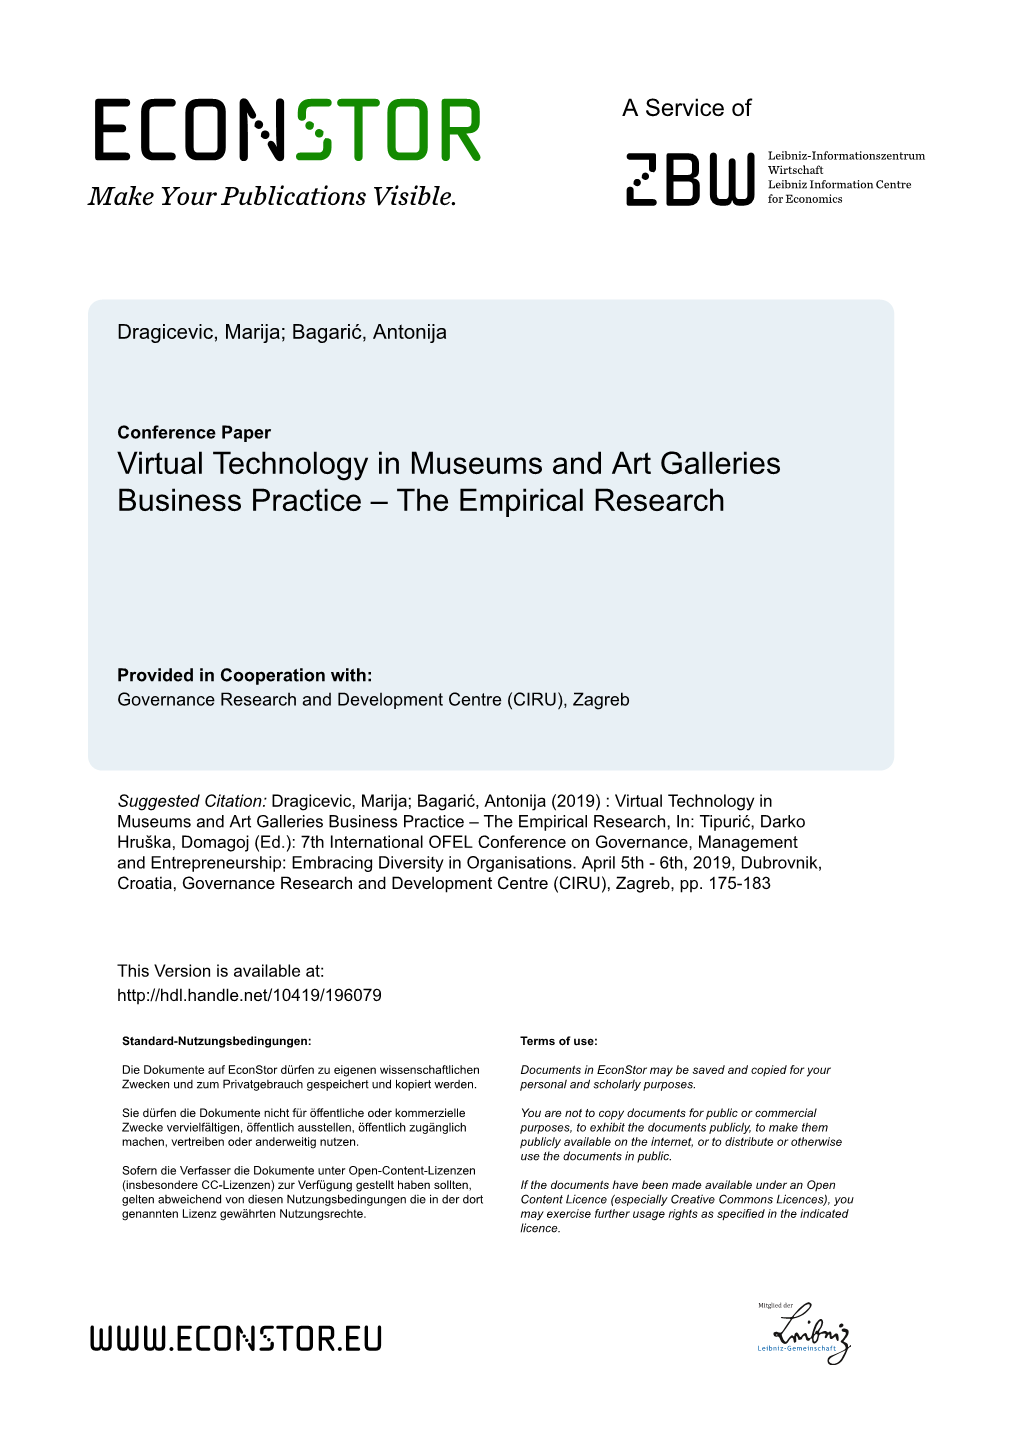 Virtual Technology in Museums and Art Galleries Business Practice – the Empirical Research